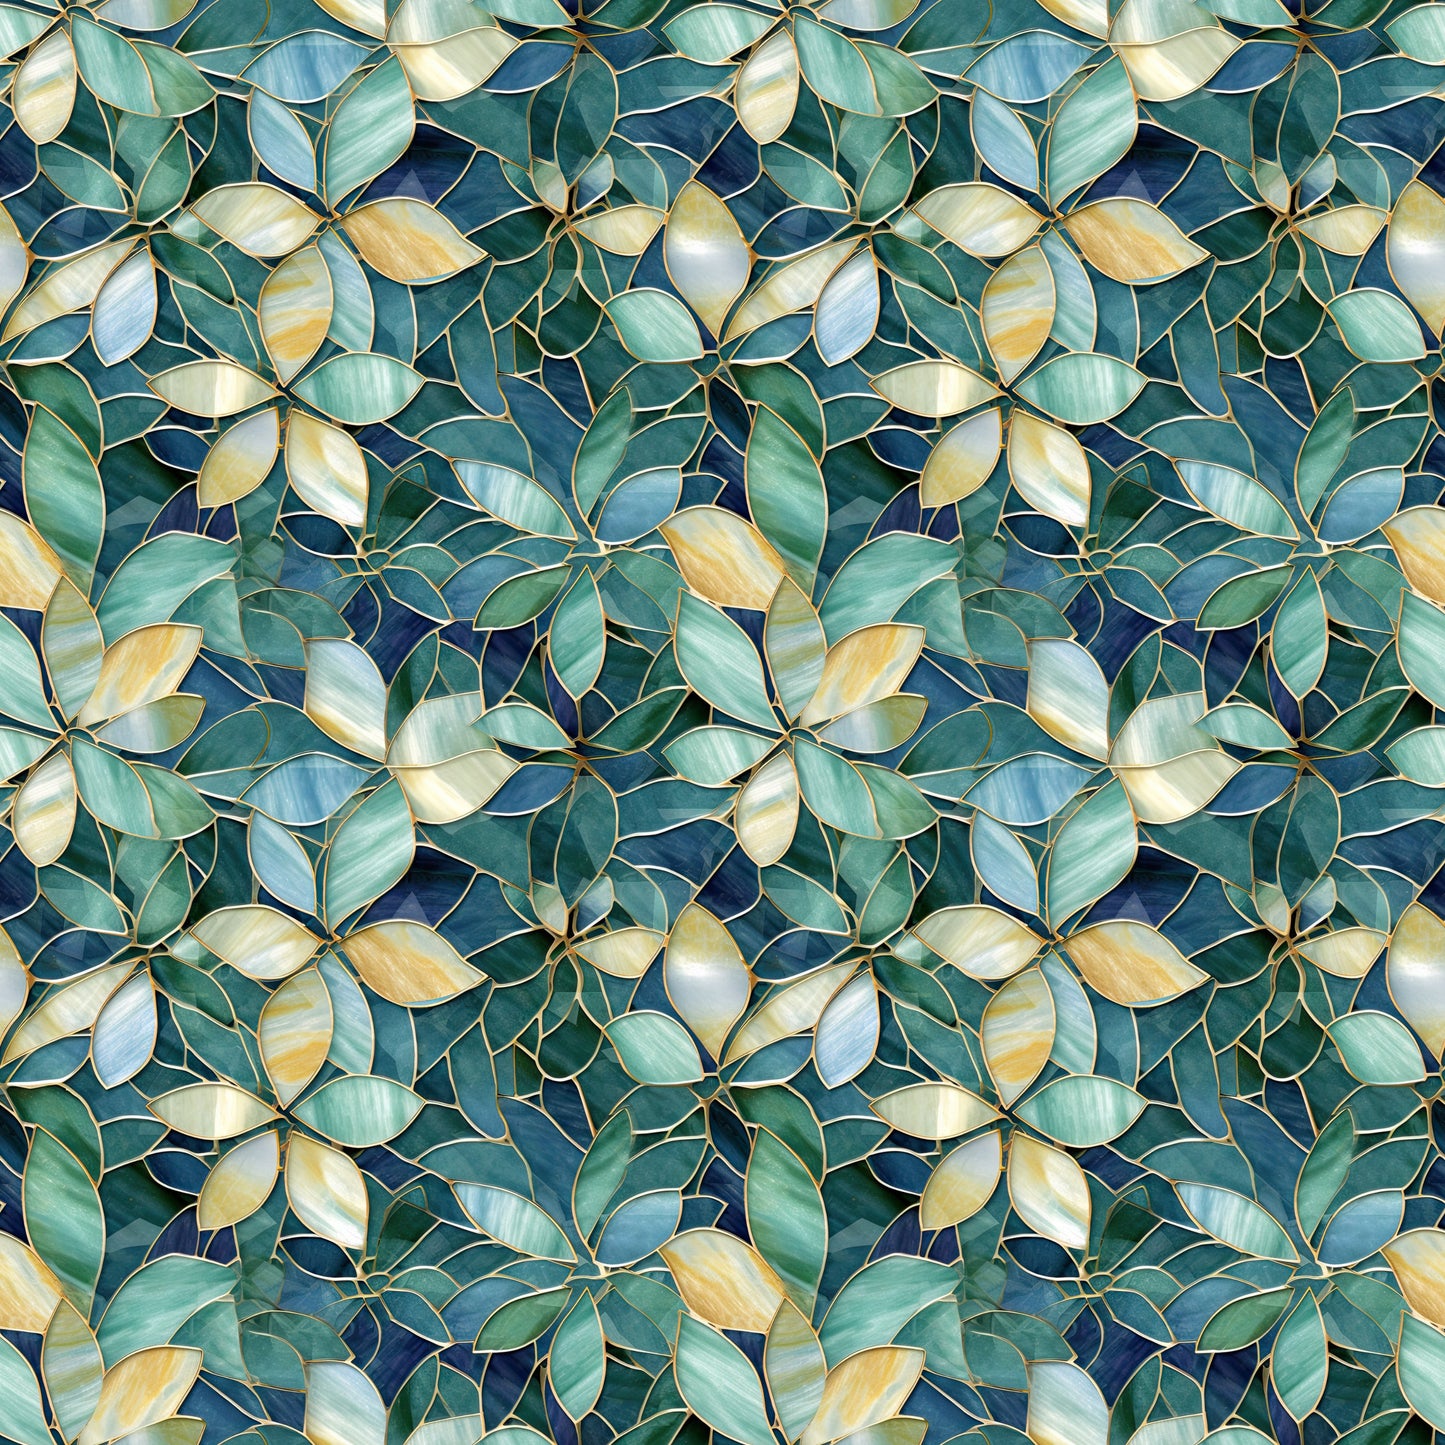 Mosaic in Green and Blue Interlock